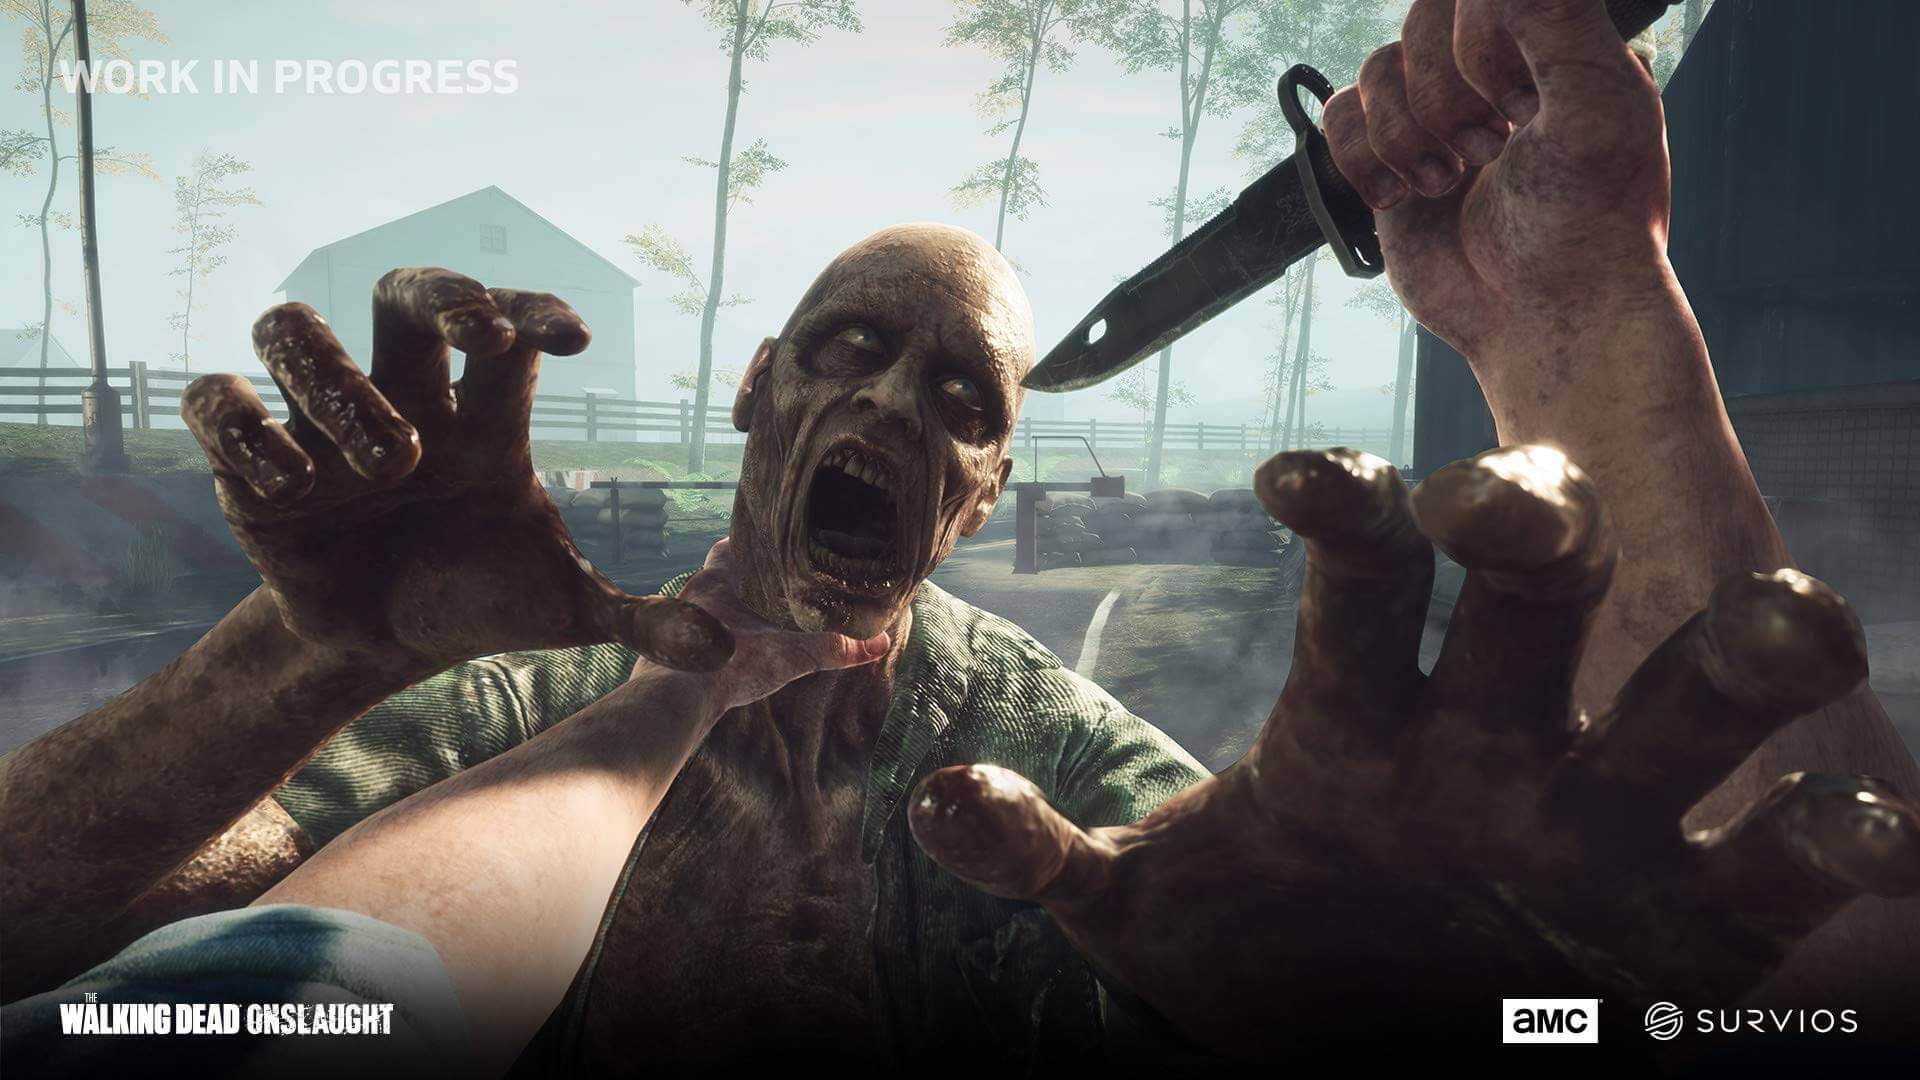 The Walking Dead: Onslaught PS4 £18.99